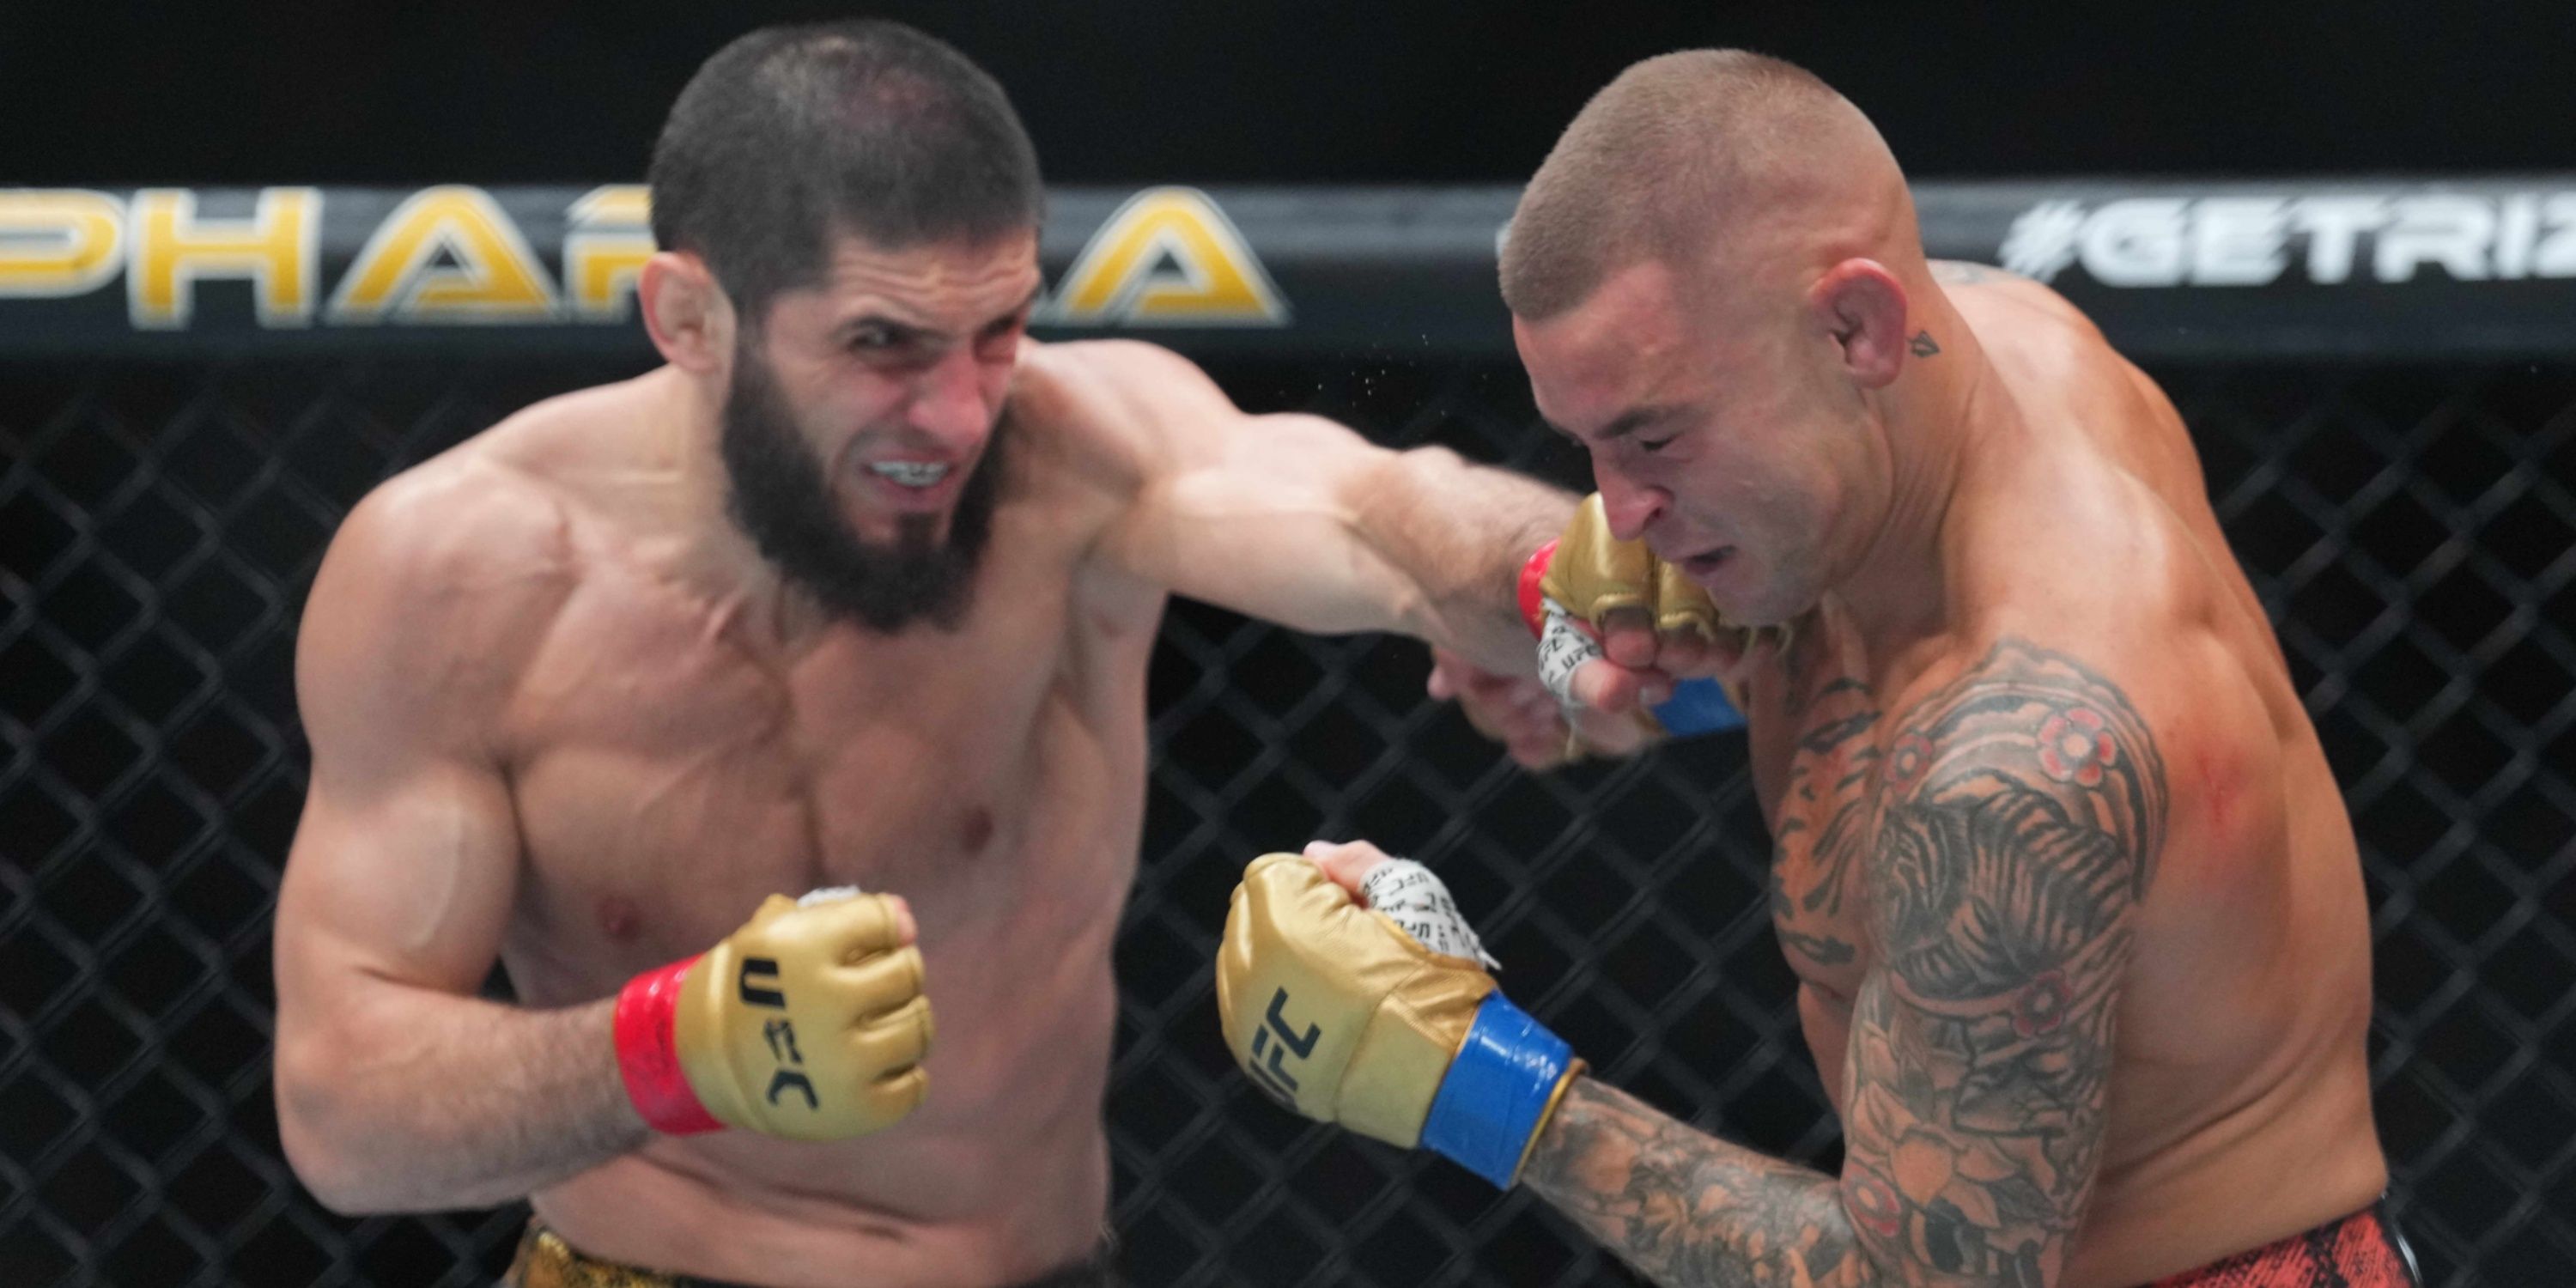 Dustin Poirier being punched by Islam Makhachev